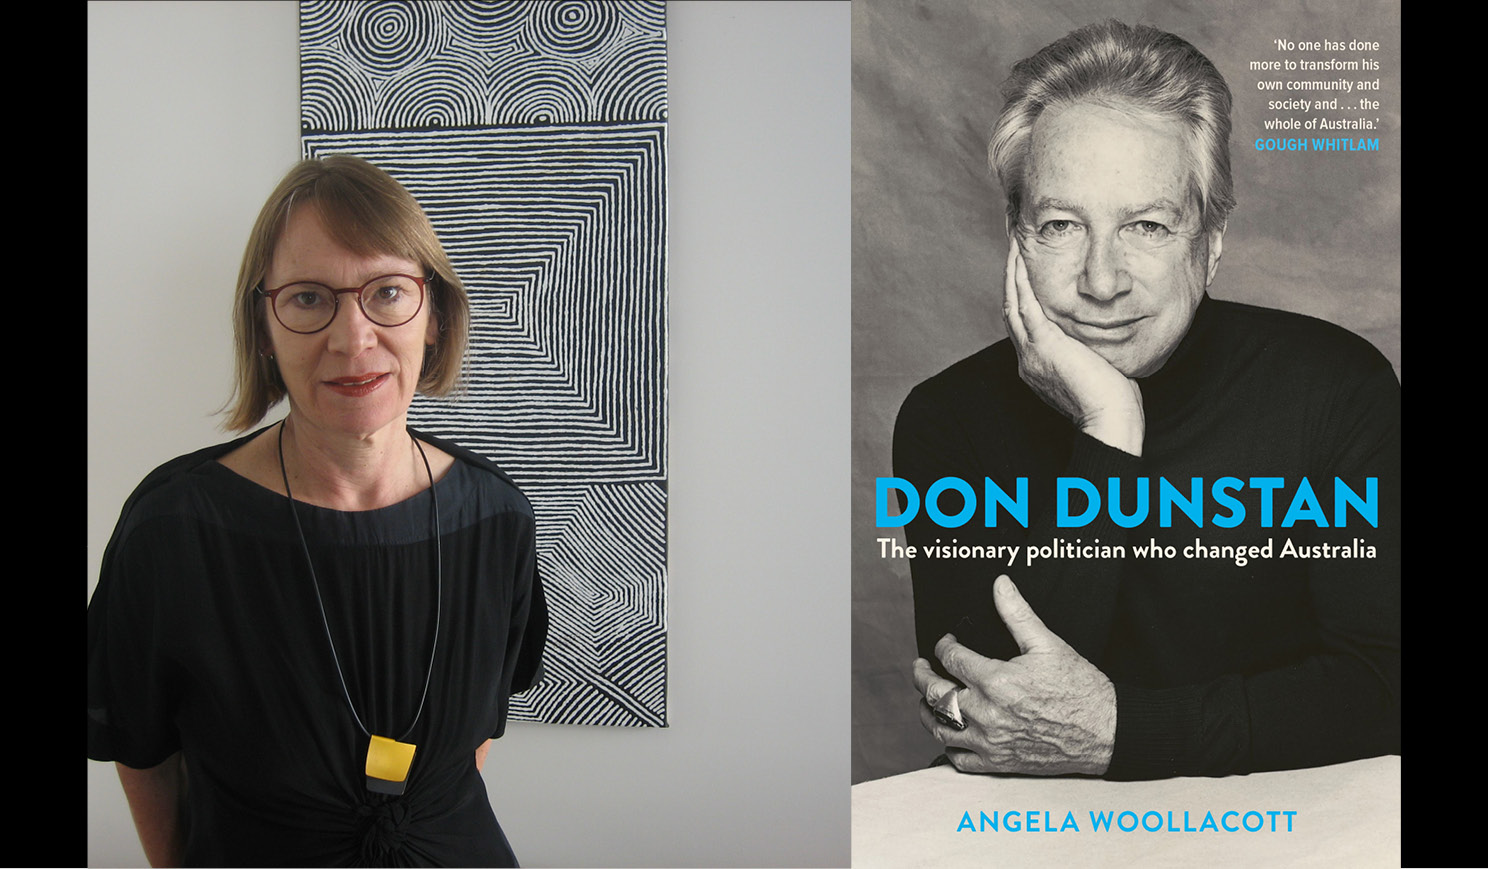 Angela Woollacott's headshot alongside the cover of her book about Don Dunstan